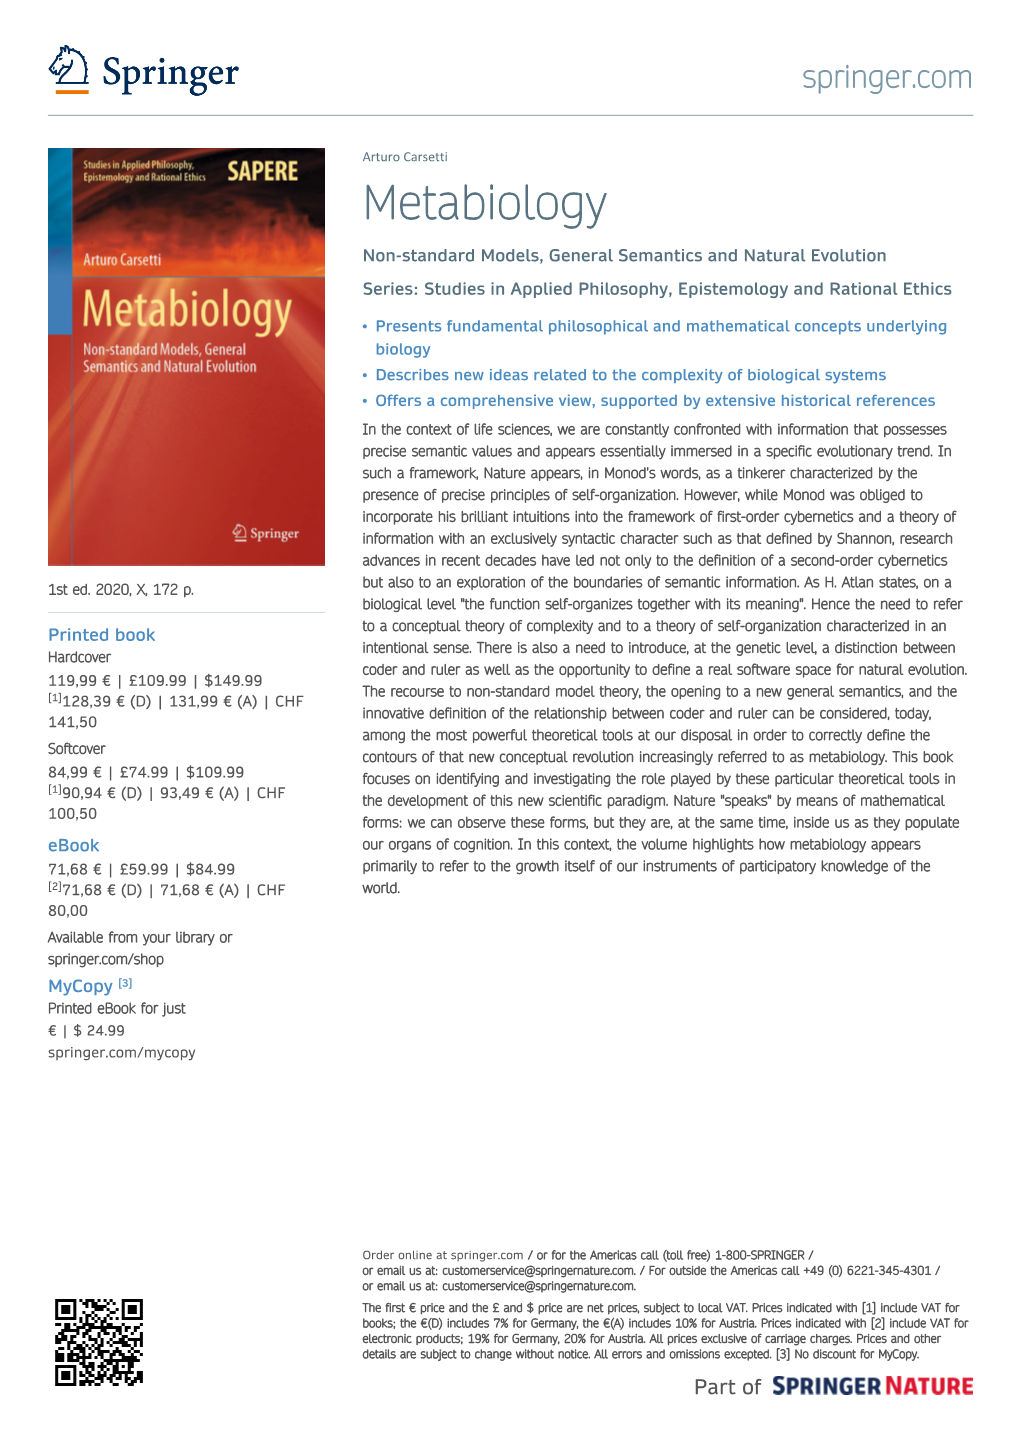 Metabiology Non-Standard Models, General Semantics and Natural Evolution Series: Studies in Applied Philosophy, Epistemology and Rational Ethics